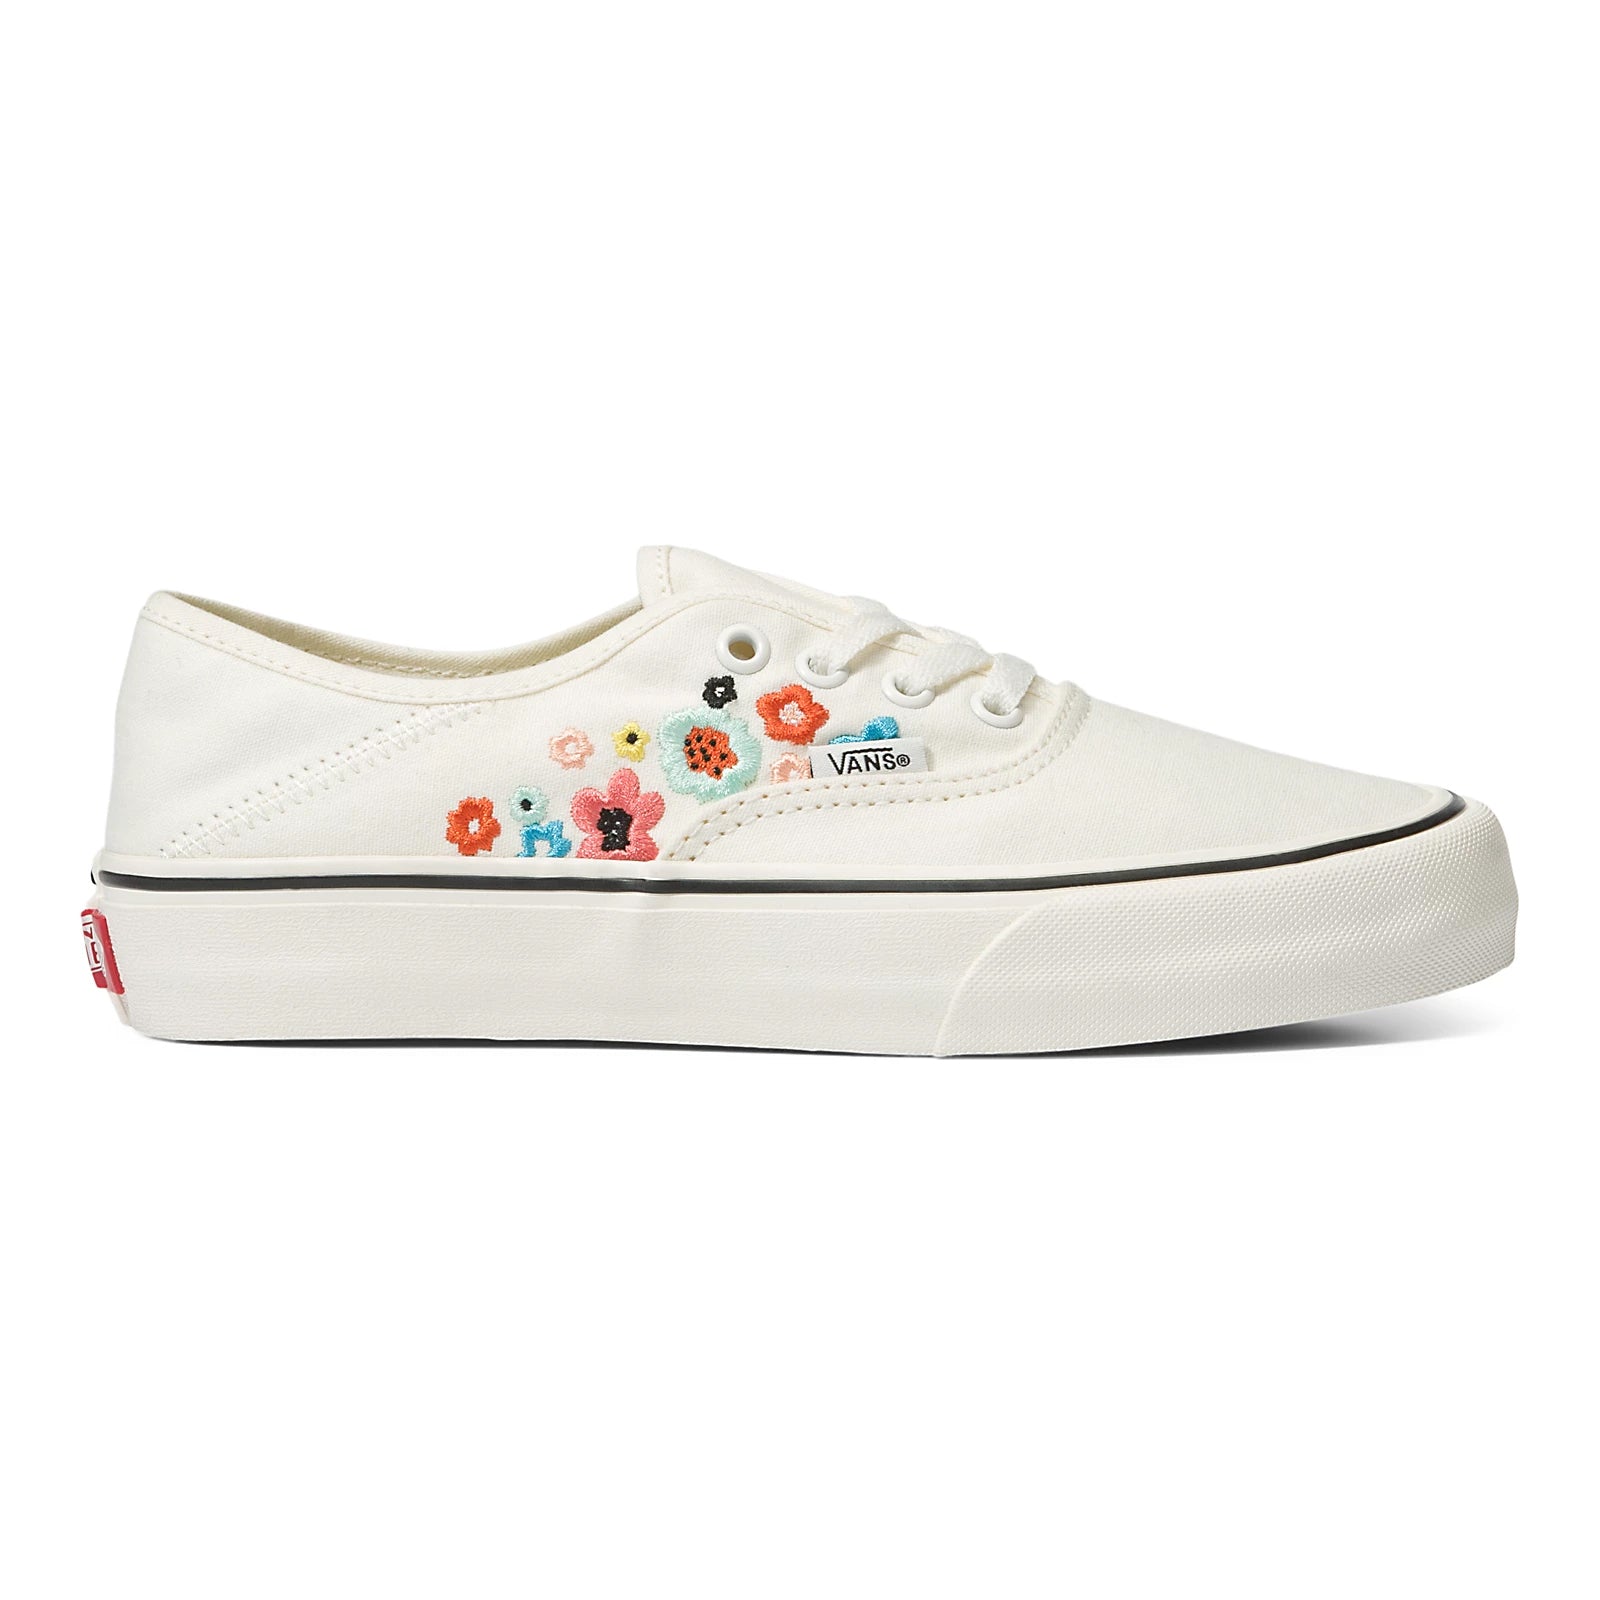 Vans Womens UA Authentic VR3 GroovyFloral/Marshmallow 8w